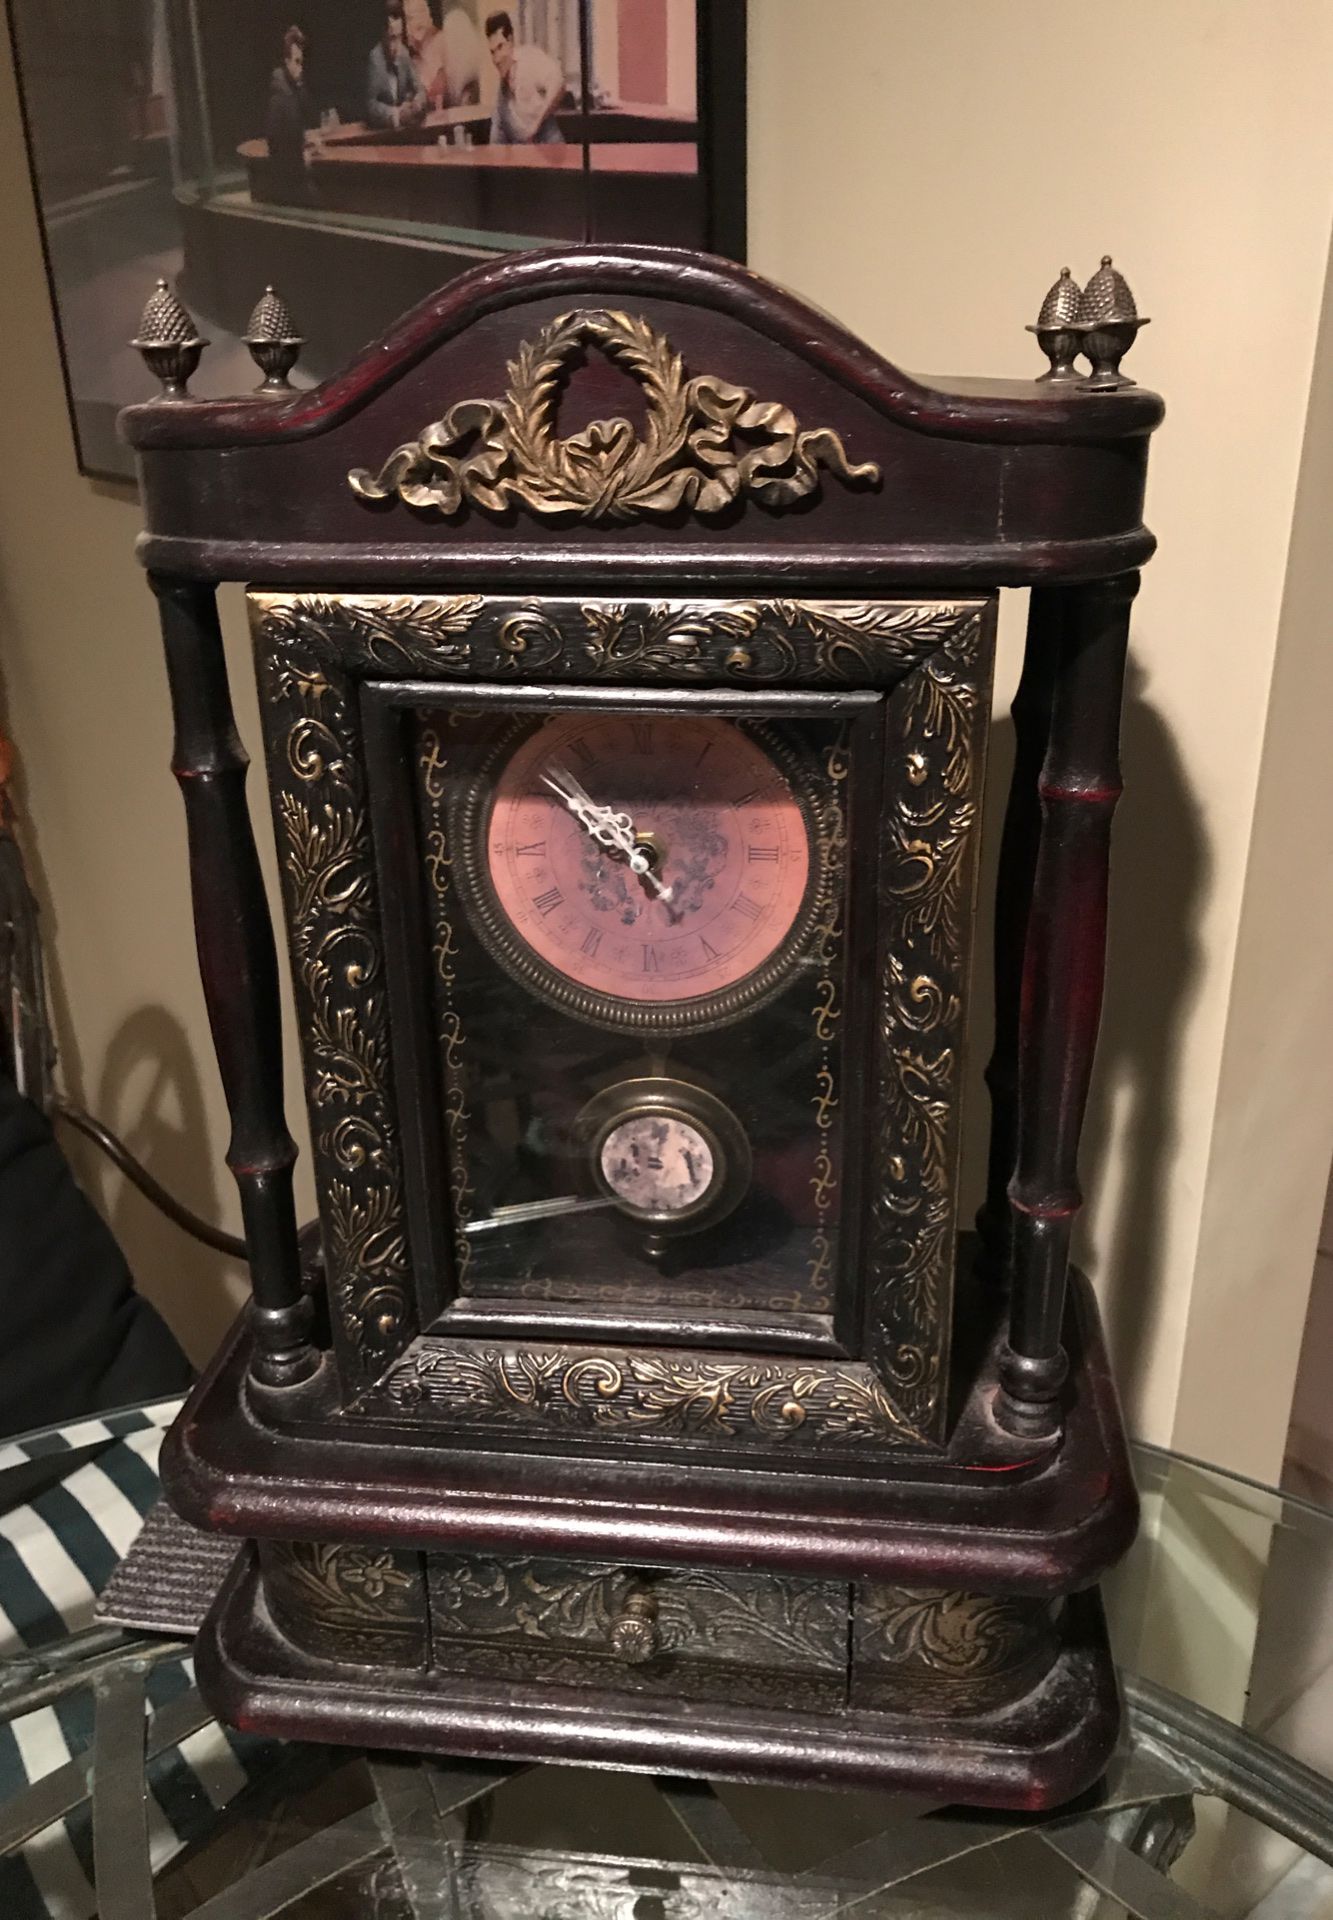 12x19 clock with stand - antique